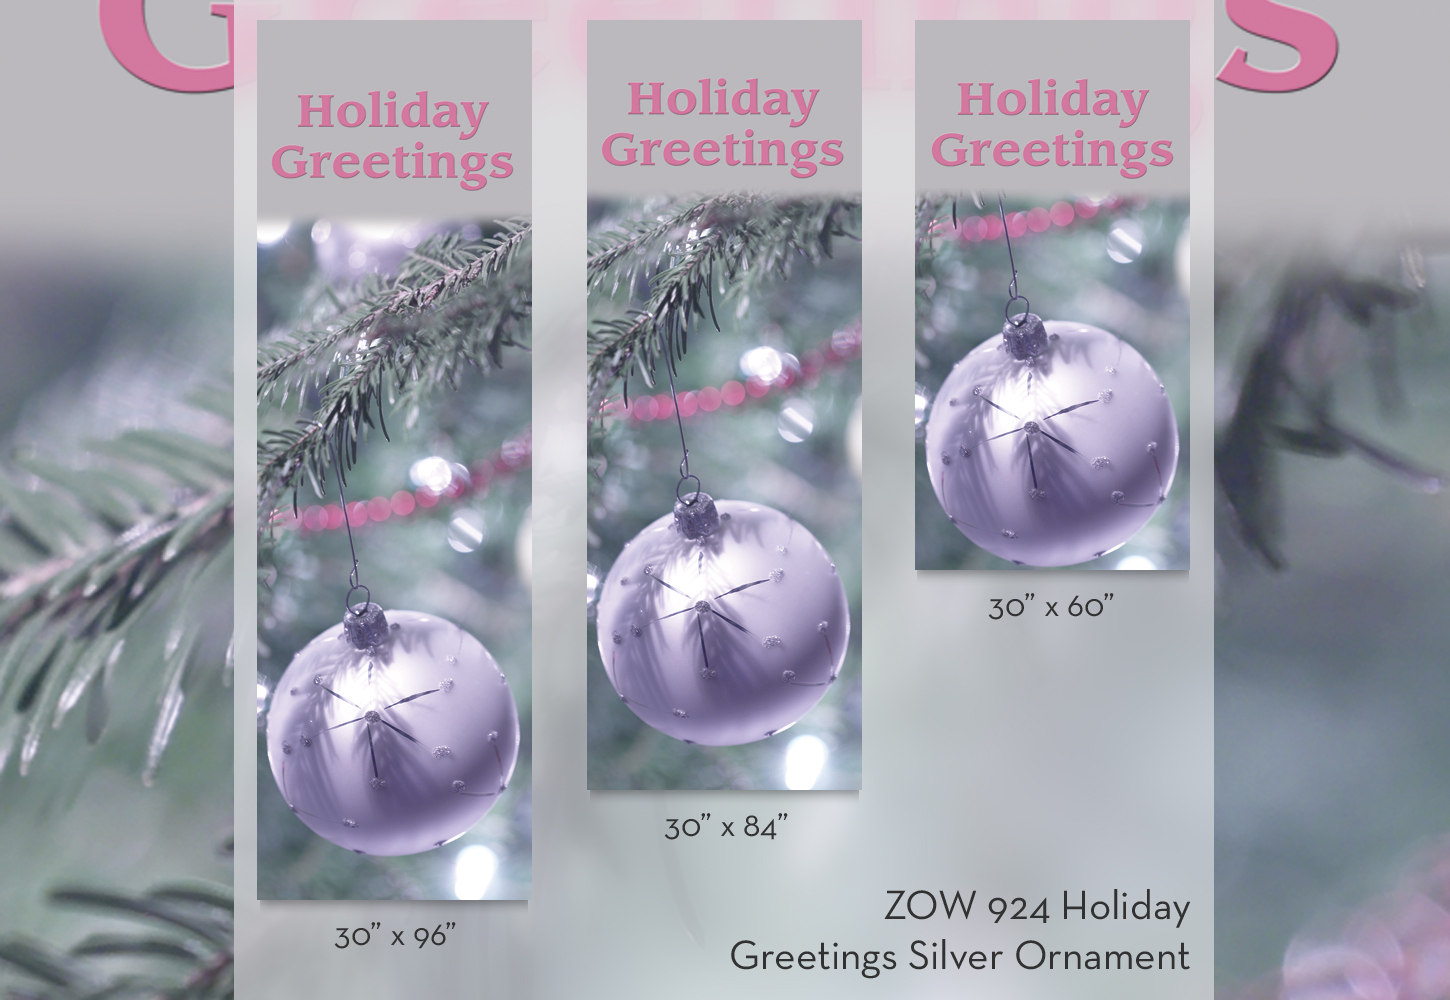 ZOW 924 Holiday Greetings Silver Ornament